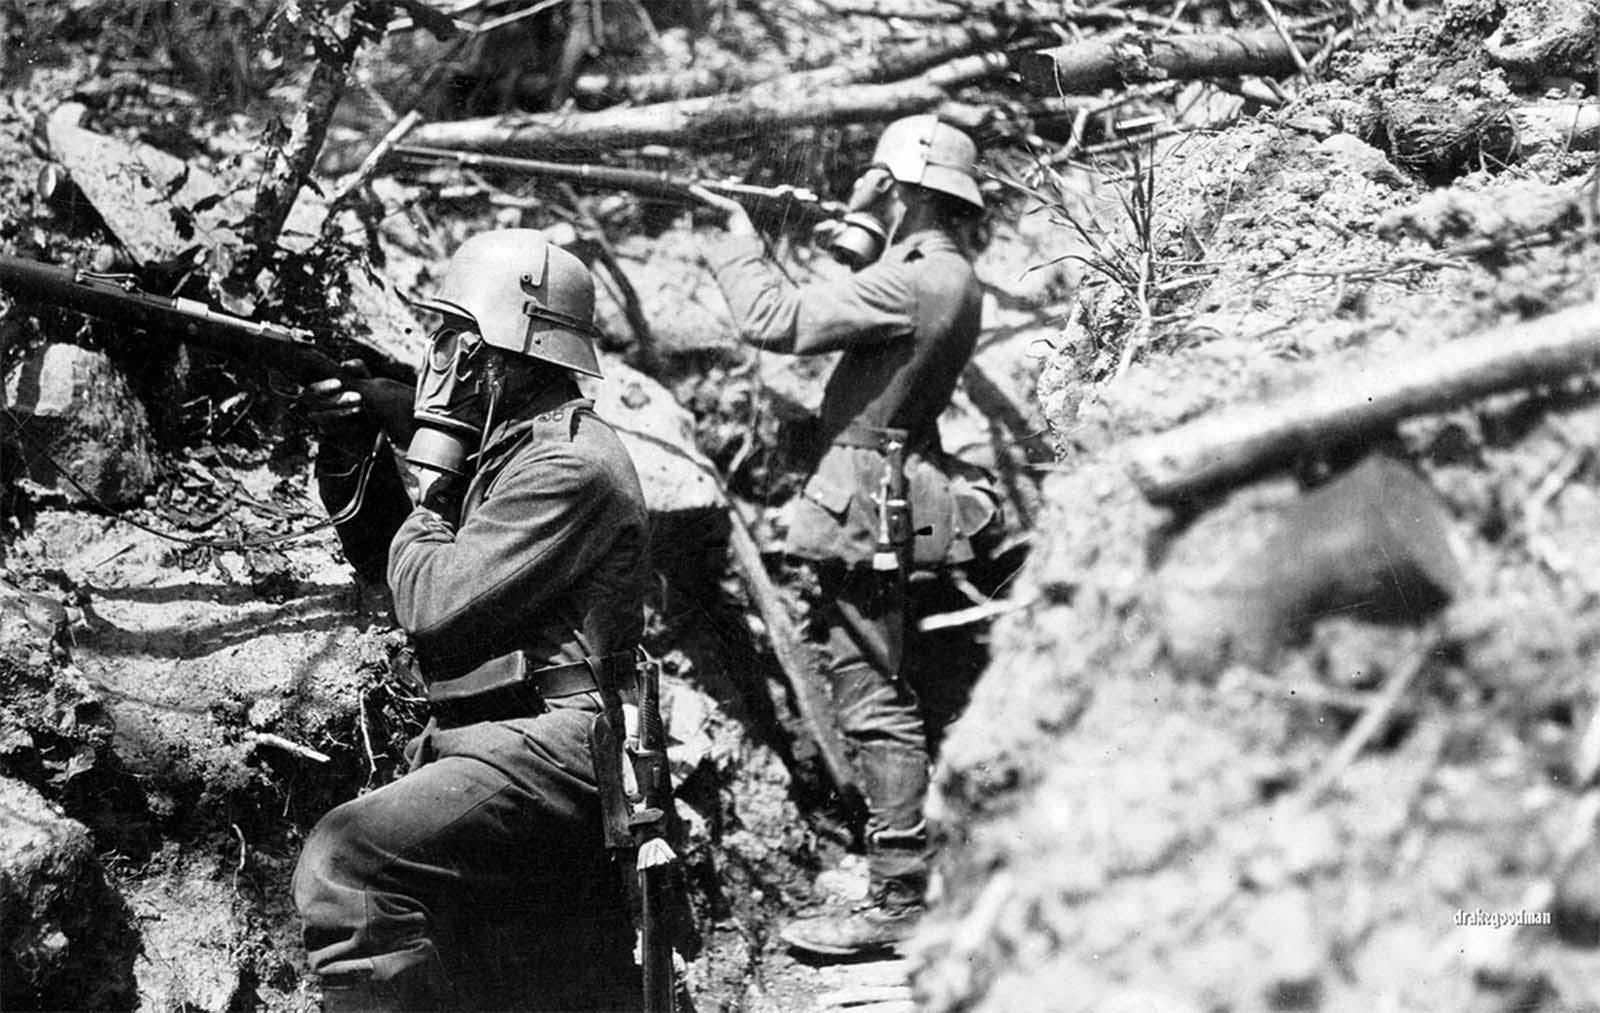 German infantrymen from Infanterie-Regiment Vogel von Falkenstein Nr.56 adopt a fighting pose in a communication trench somewhere on the the Western Front. Both soldiers are wearing gas masks and Stahlhelm helmets, with brow plate attachments called stirnpanzers. The stirnpanzer was a heavy steel plate used for additional protection for snipers and raiding parties in the trenches, where popping your head above ground for a look could be lethal move